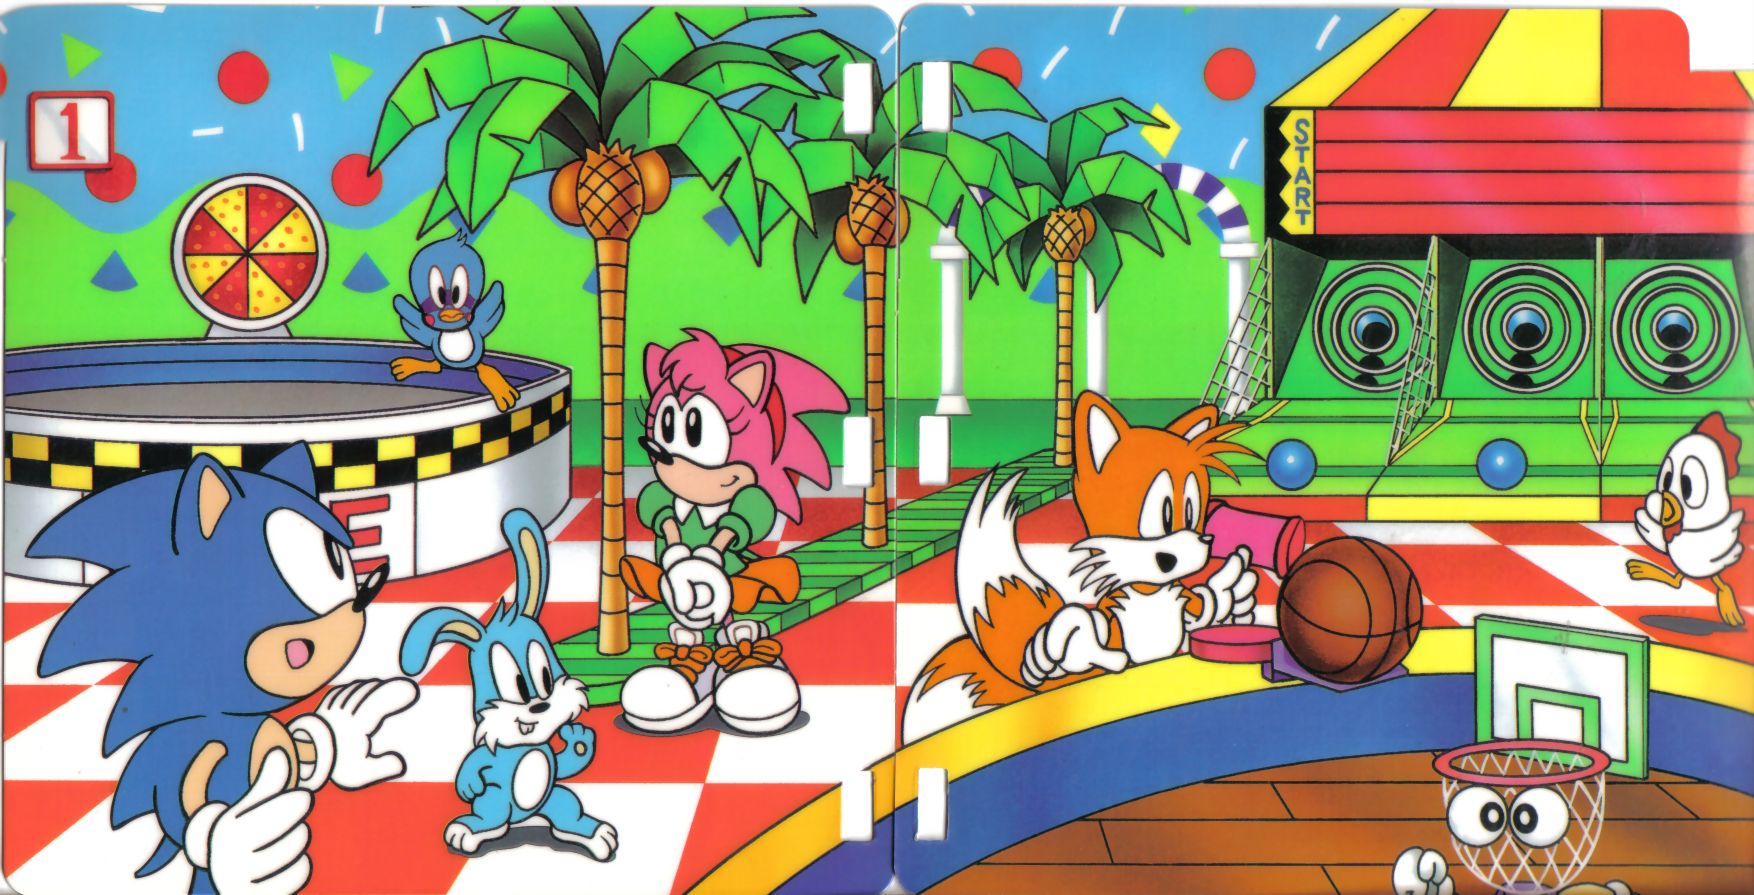 SEGA Retrospective: Over 20 years later, and the Pico is still an